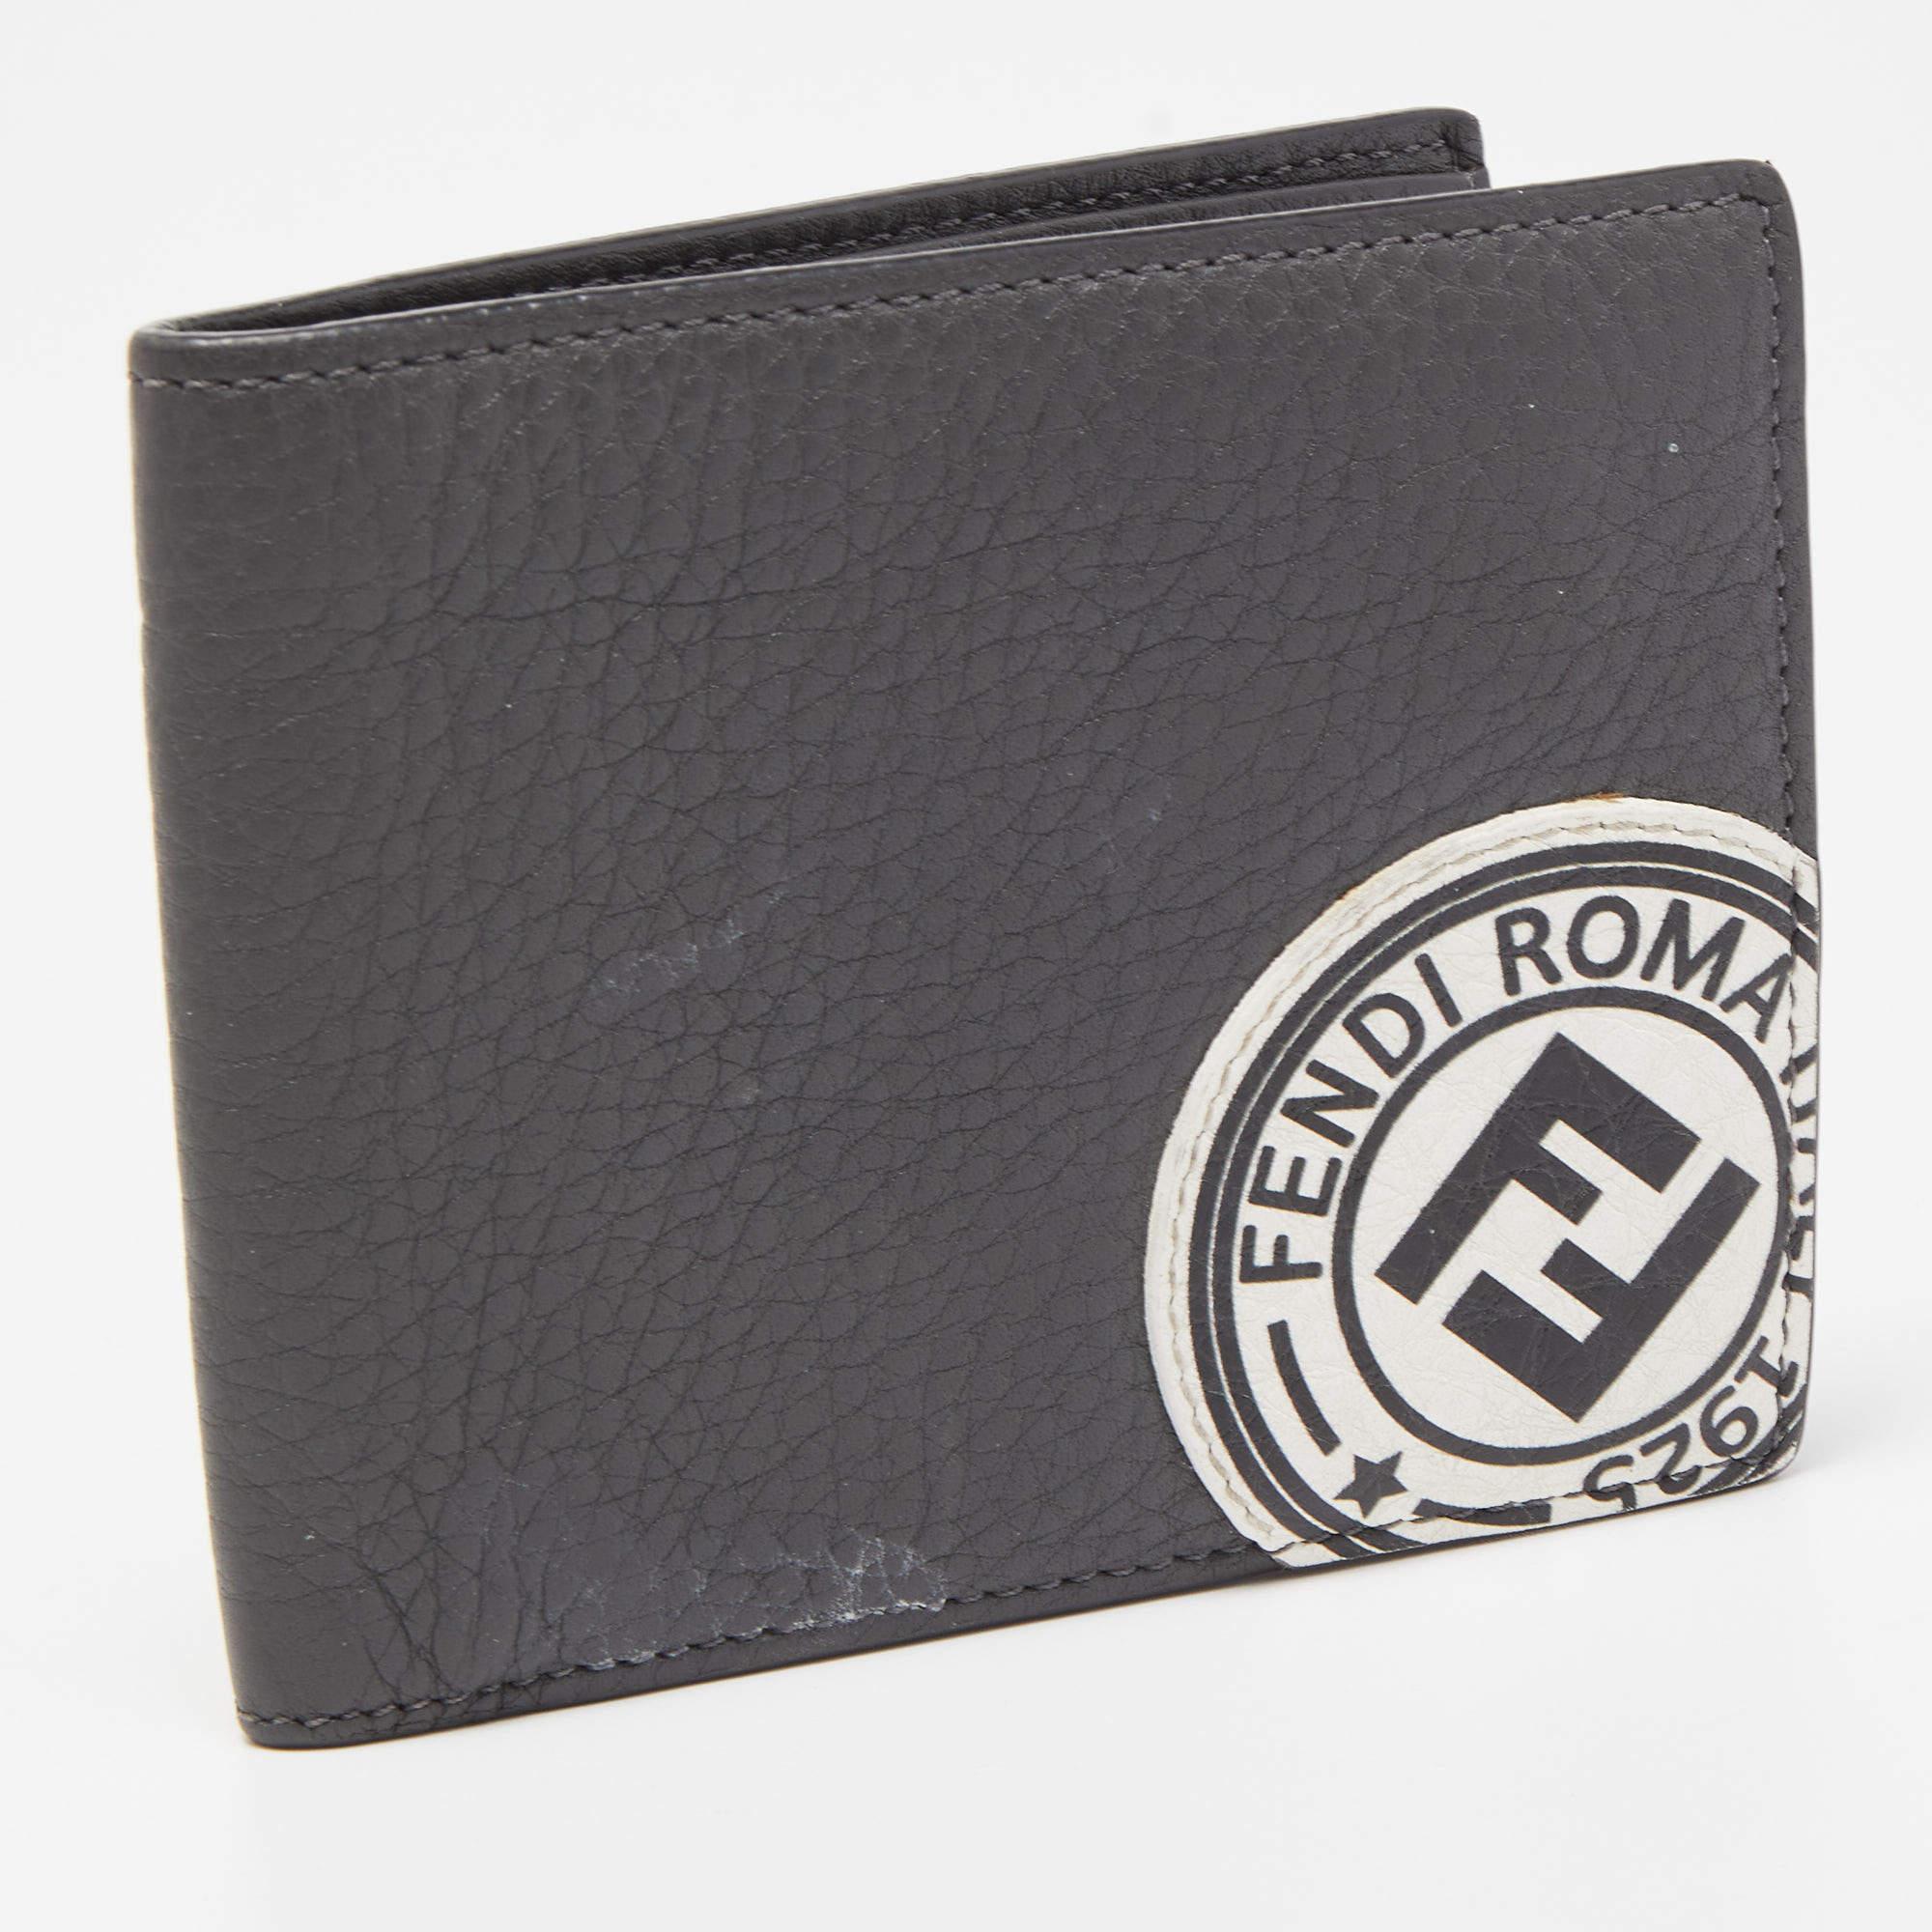 This authentic Fendi wallet for men has a look of luxury. It is crafted from leather as a bifold and equipped with compartments and multiple slots to neatly house your cards and cash.

